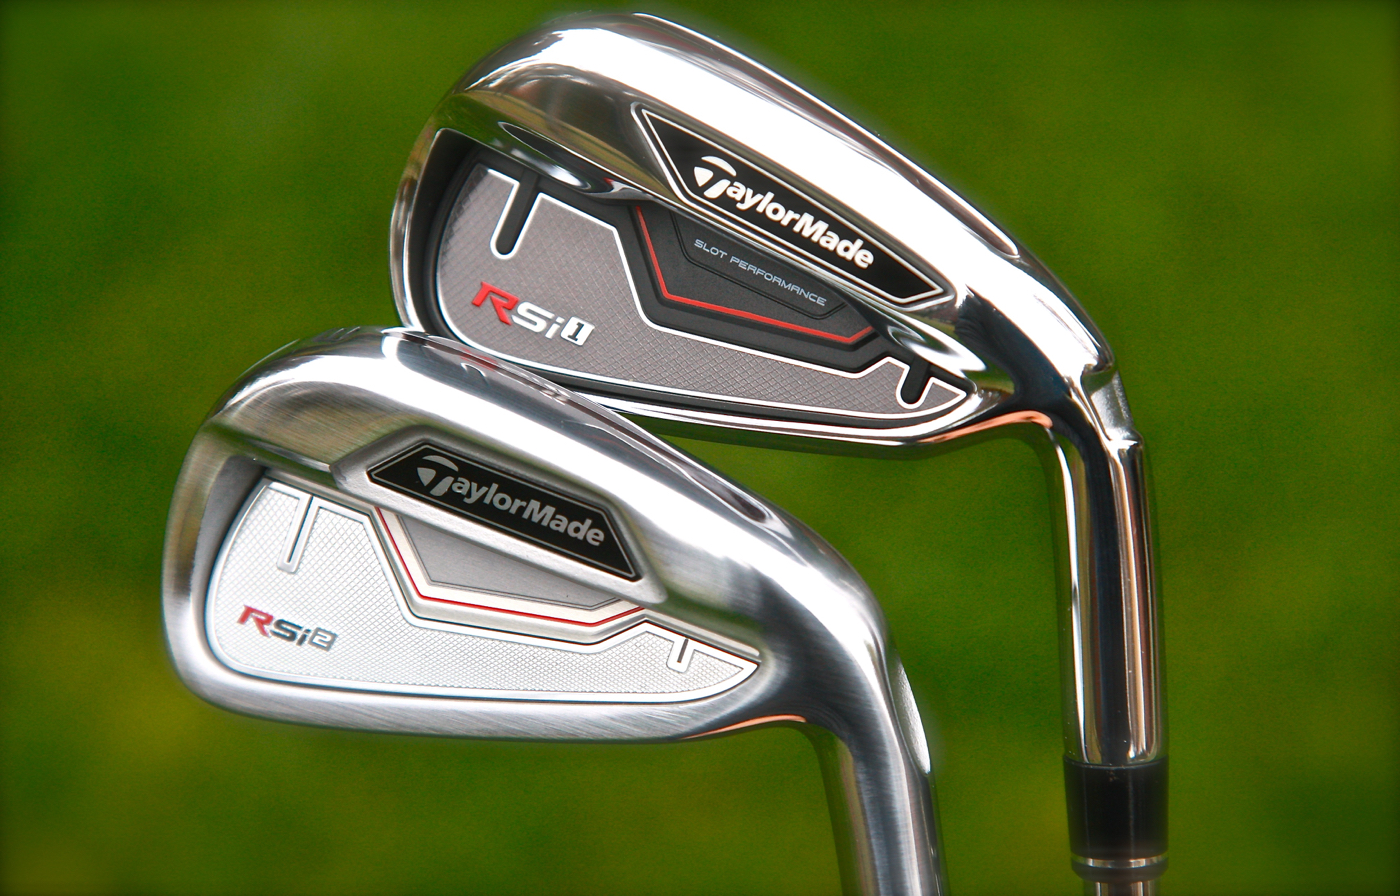 TaylorMade RSi irons are available to play at ClubstoHire.com and to purchase at ClubstoBuy.com